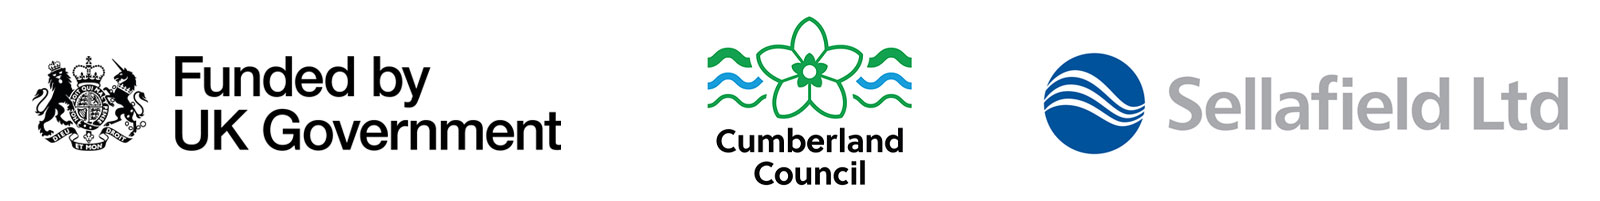 The Cumberland Food & Drink Programme is funded by the UK Government through the UK Shared Prosperity Fund and is supported by Cumberland Council and Sellafield.